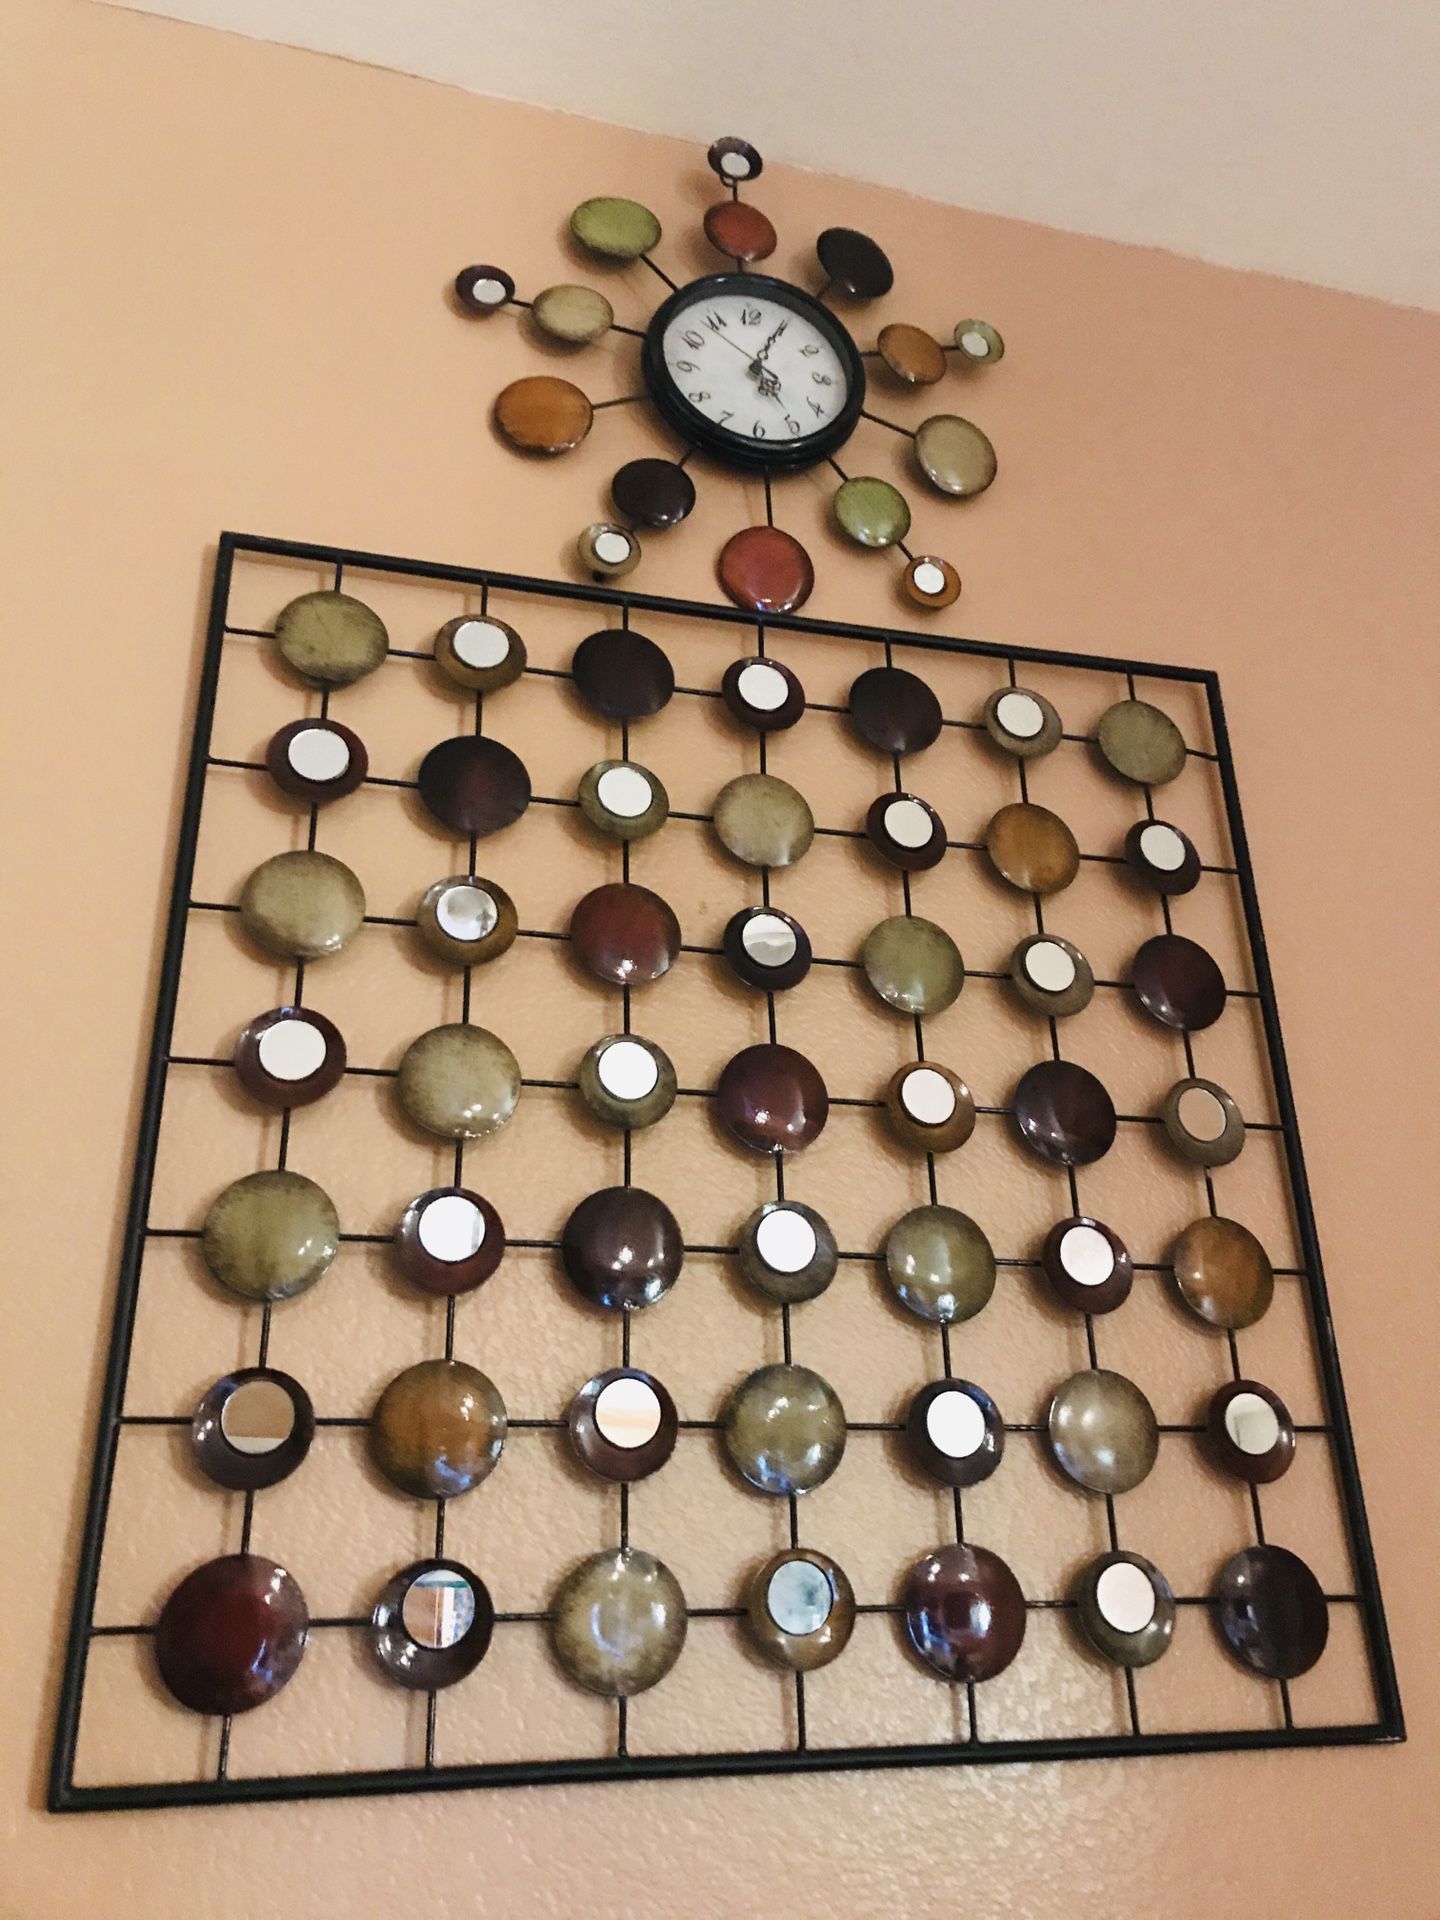 Wall frame with clock